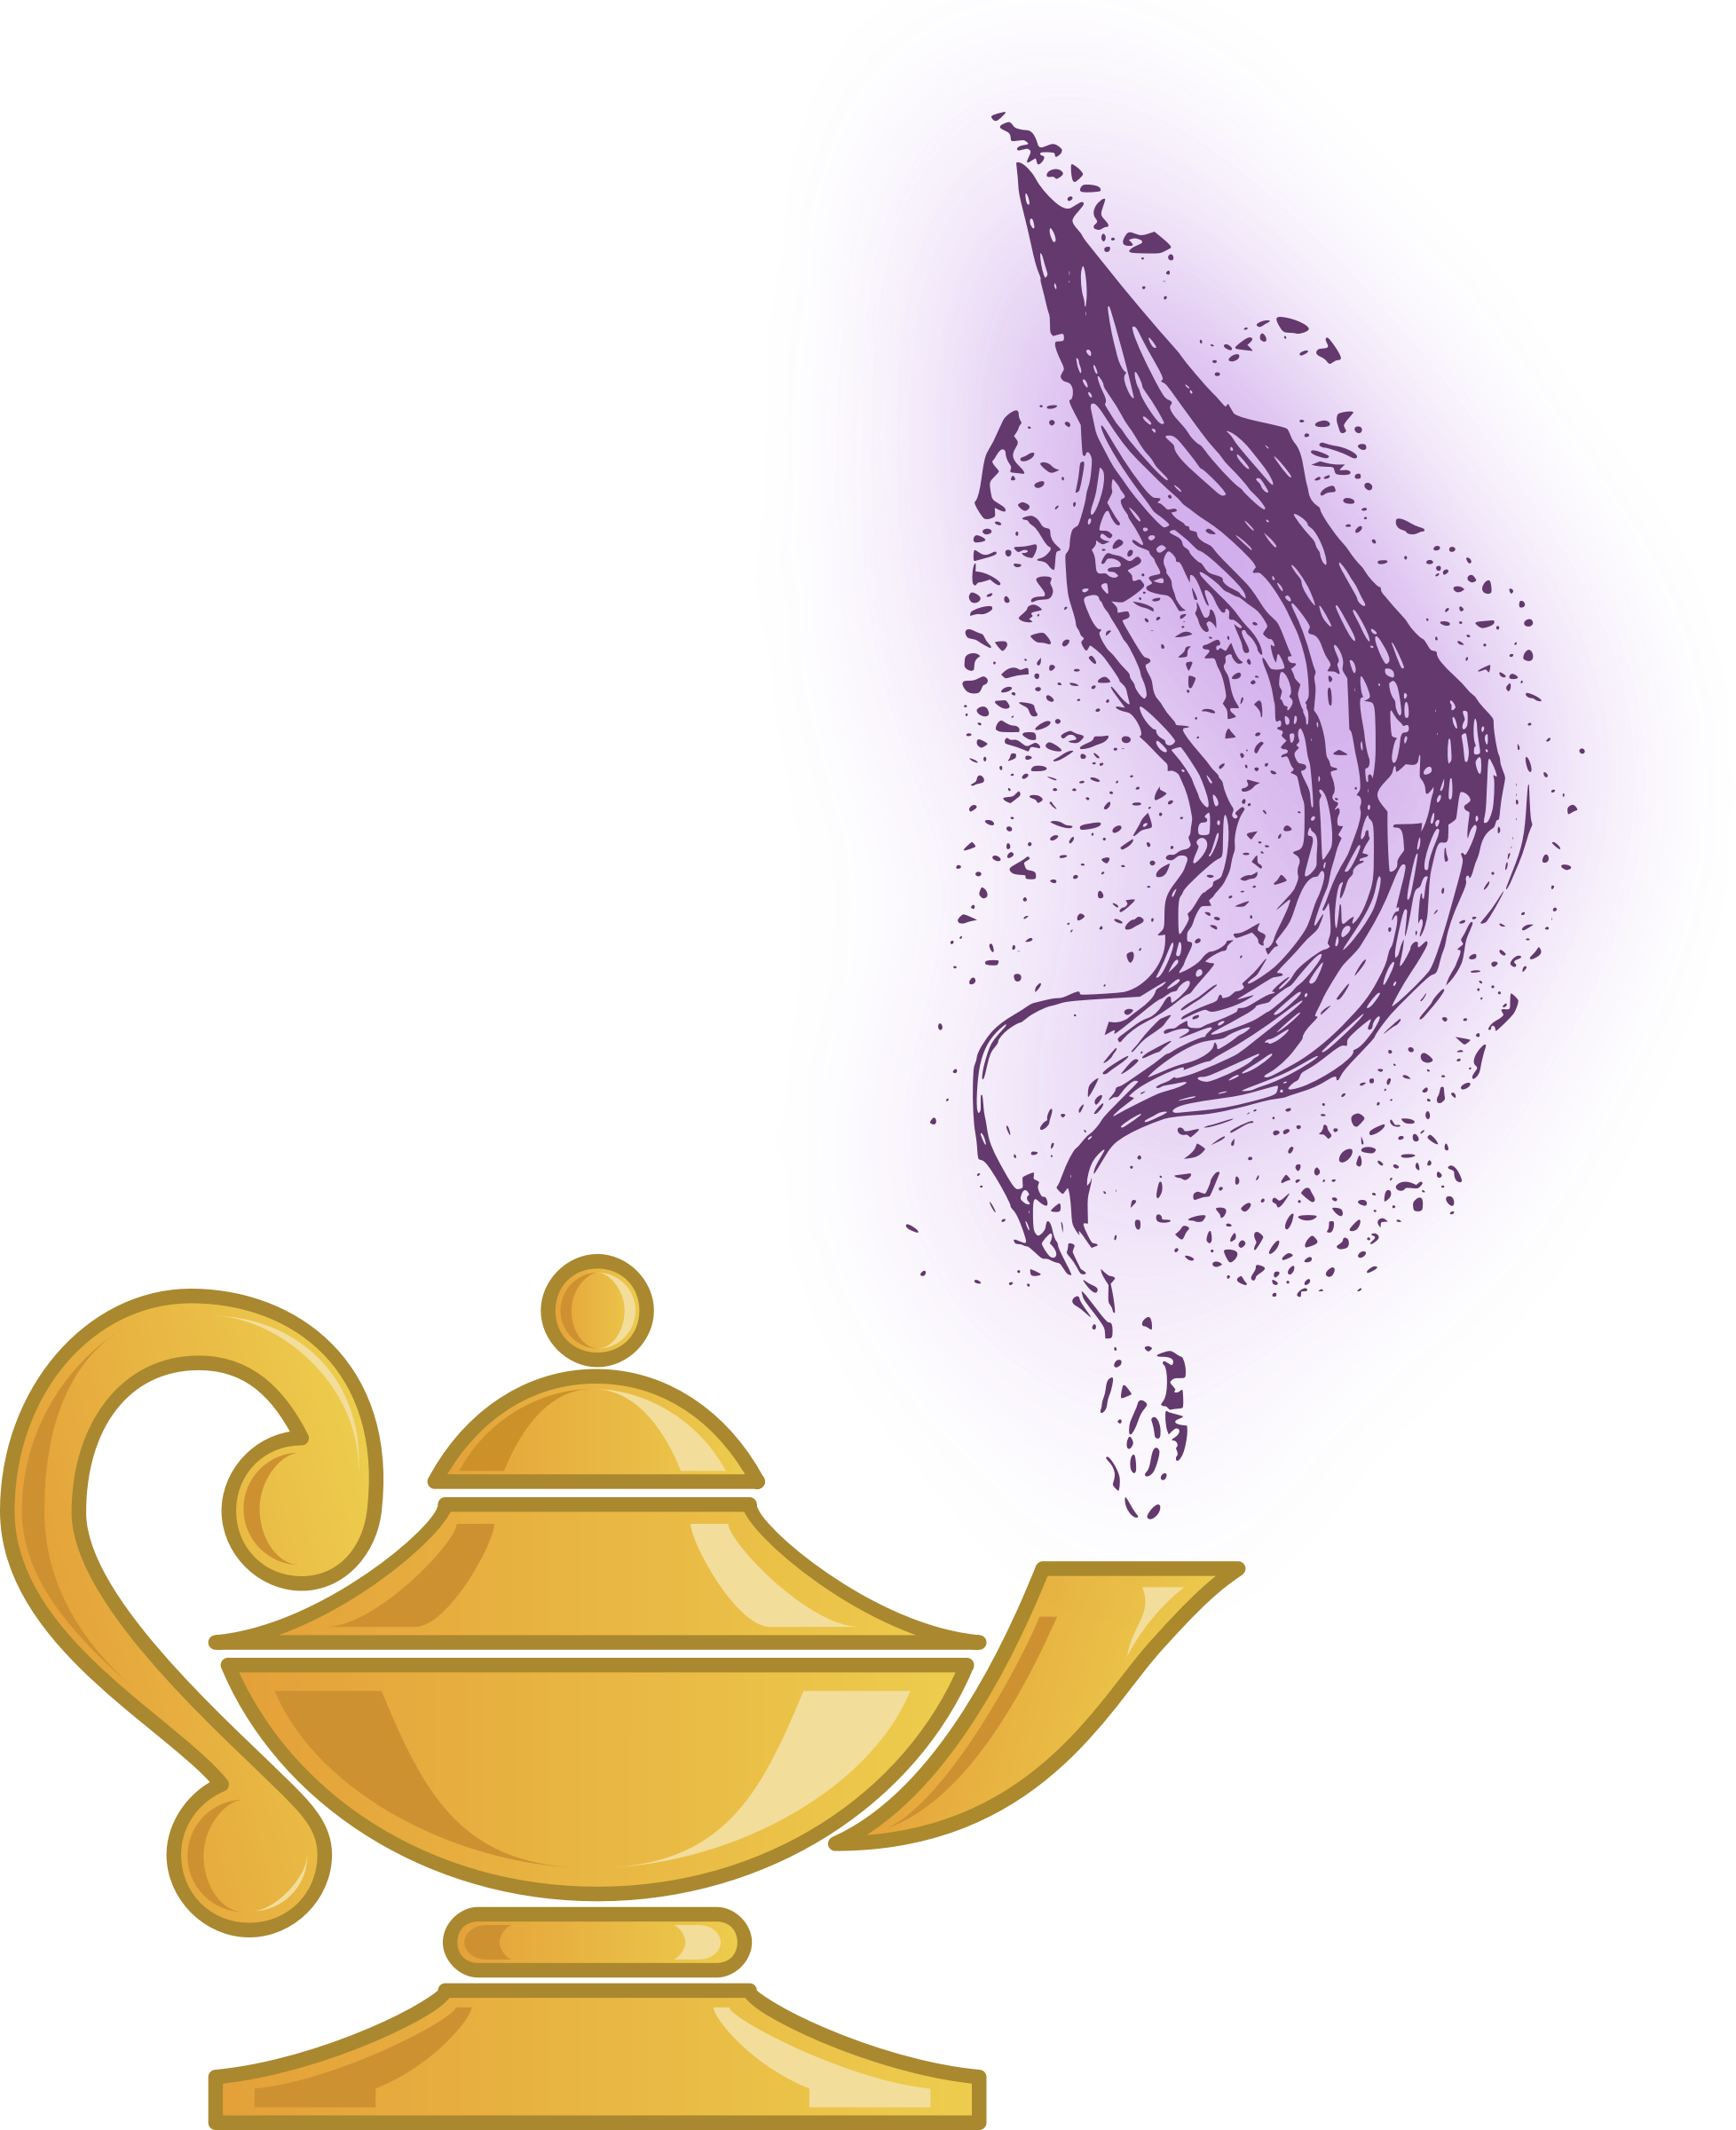 Magic Lamp with purple smoke coming out vector clipart image - Free stock photo - Public Domain ...